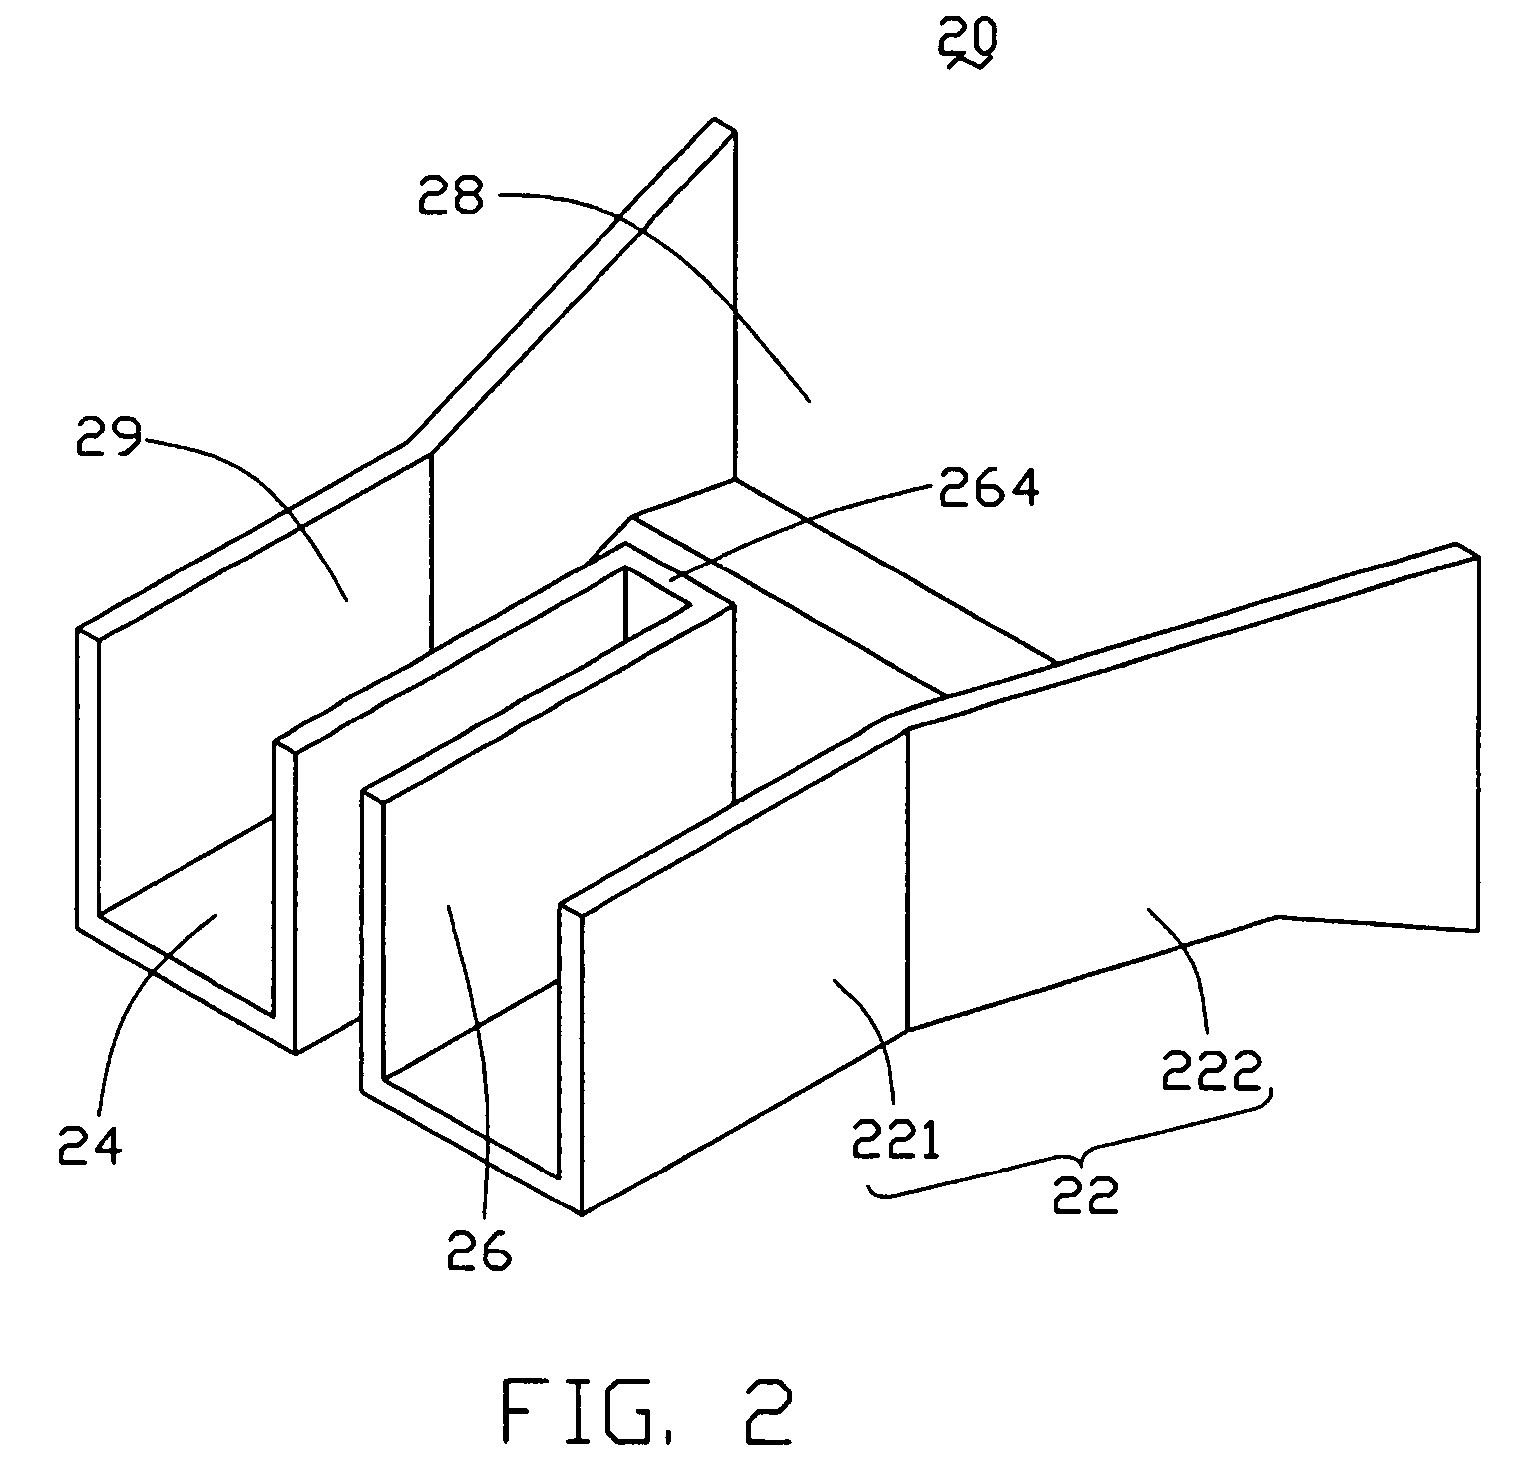 Heat dissipation device incorporating fan duct